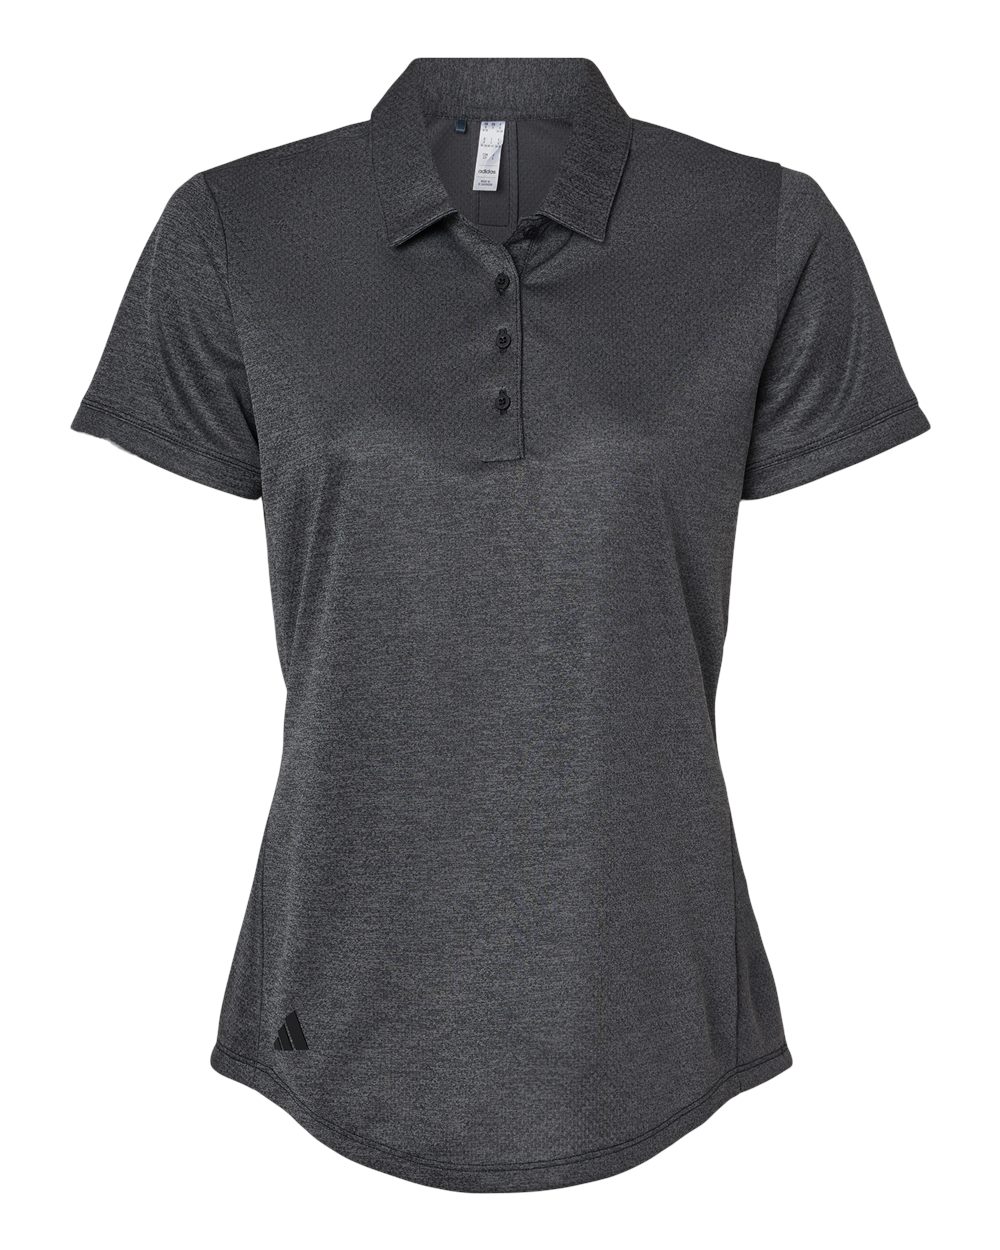 Adidas A592 Women's Space Dyed Polo #color_Black Melange